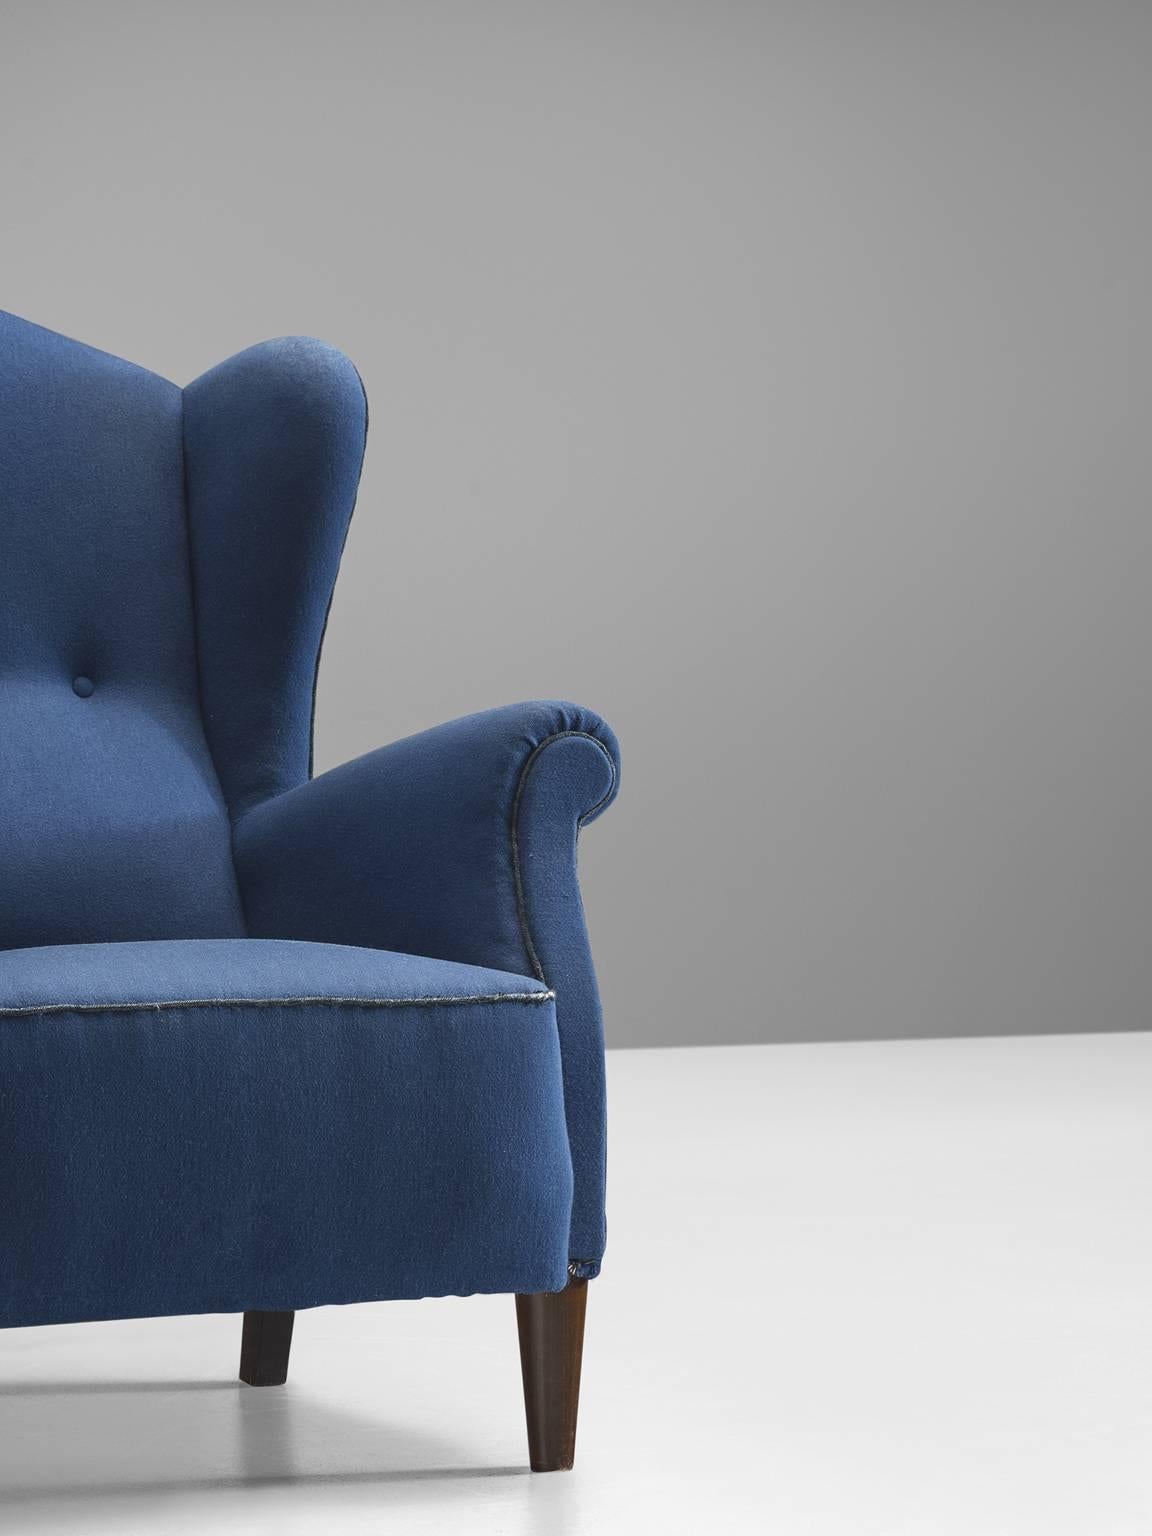 Mid-20th Century Danish Easy Chair in Blue Original Upholstery